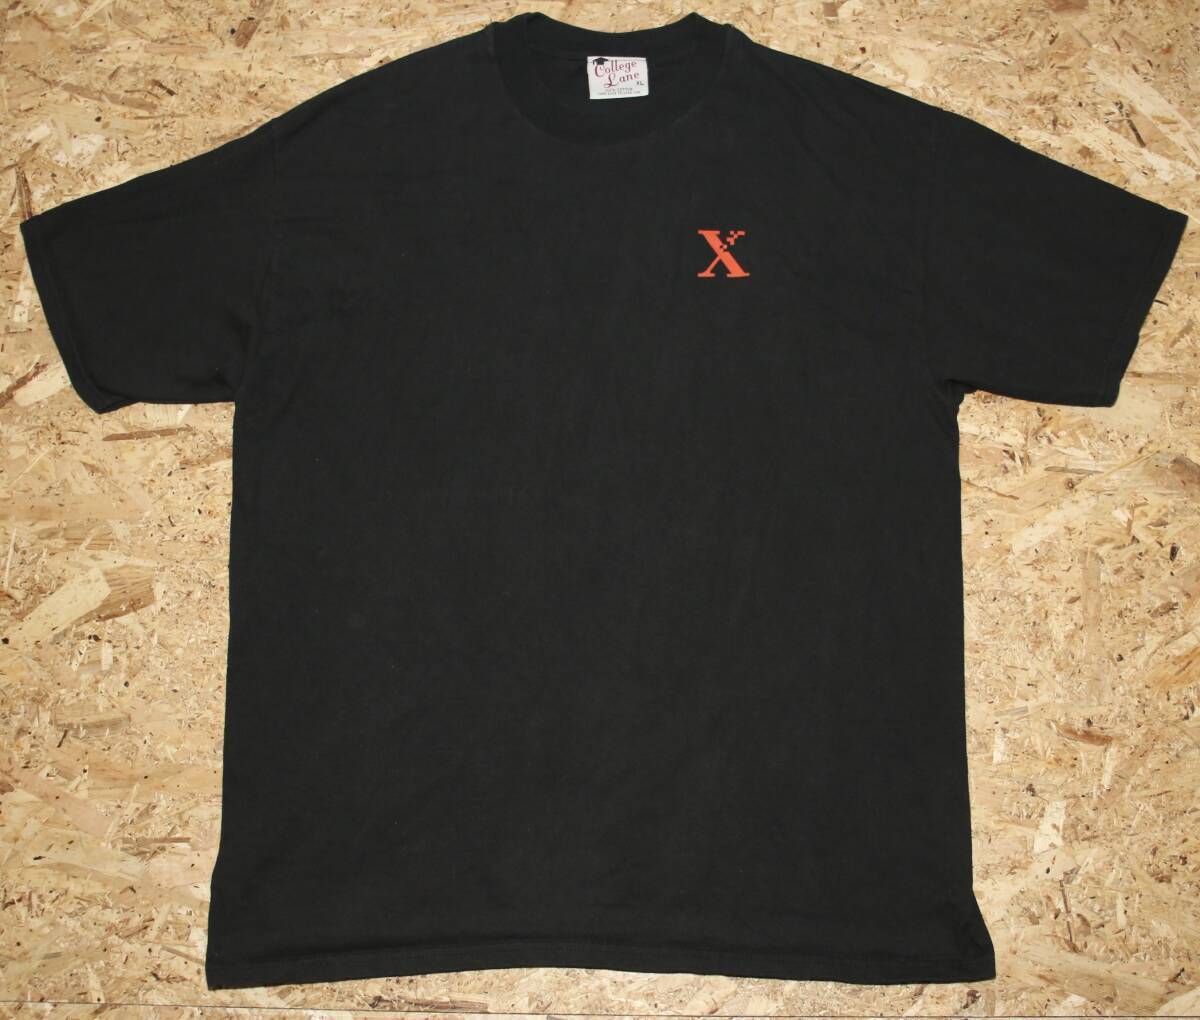 Vintage Fuji Xerox T-Shirt Xl Made In America Thick Cotton Around 2000 Corporate